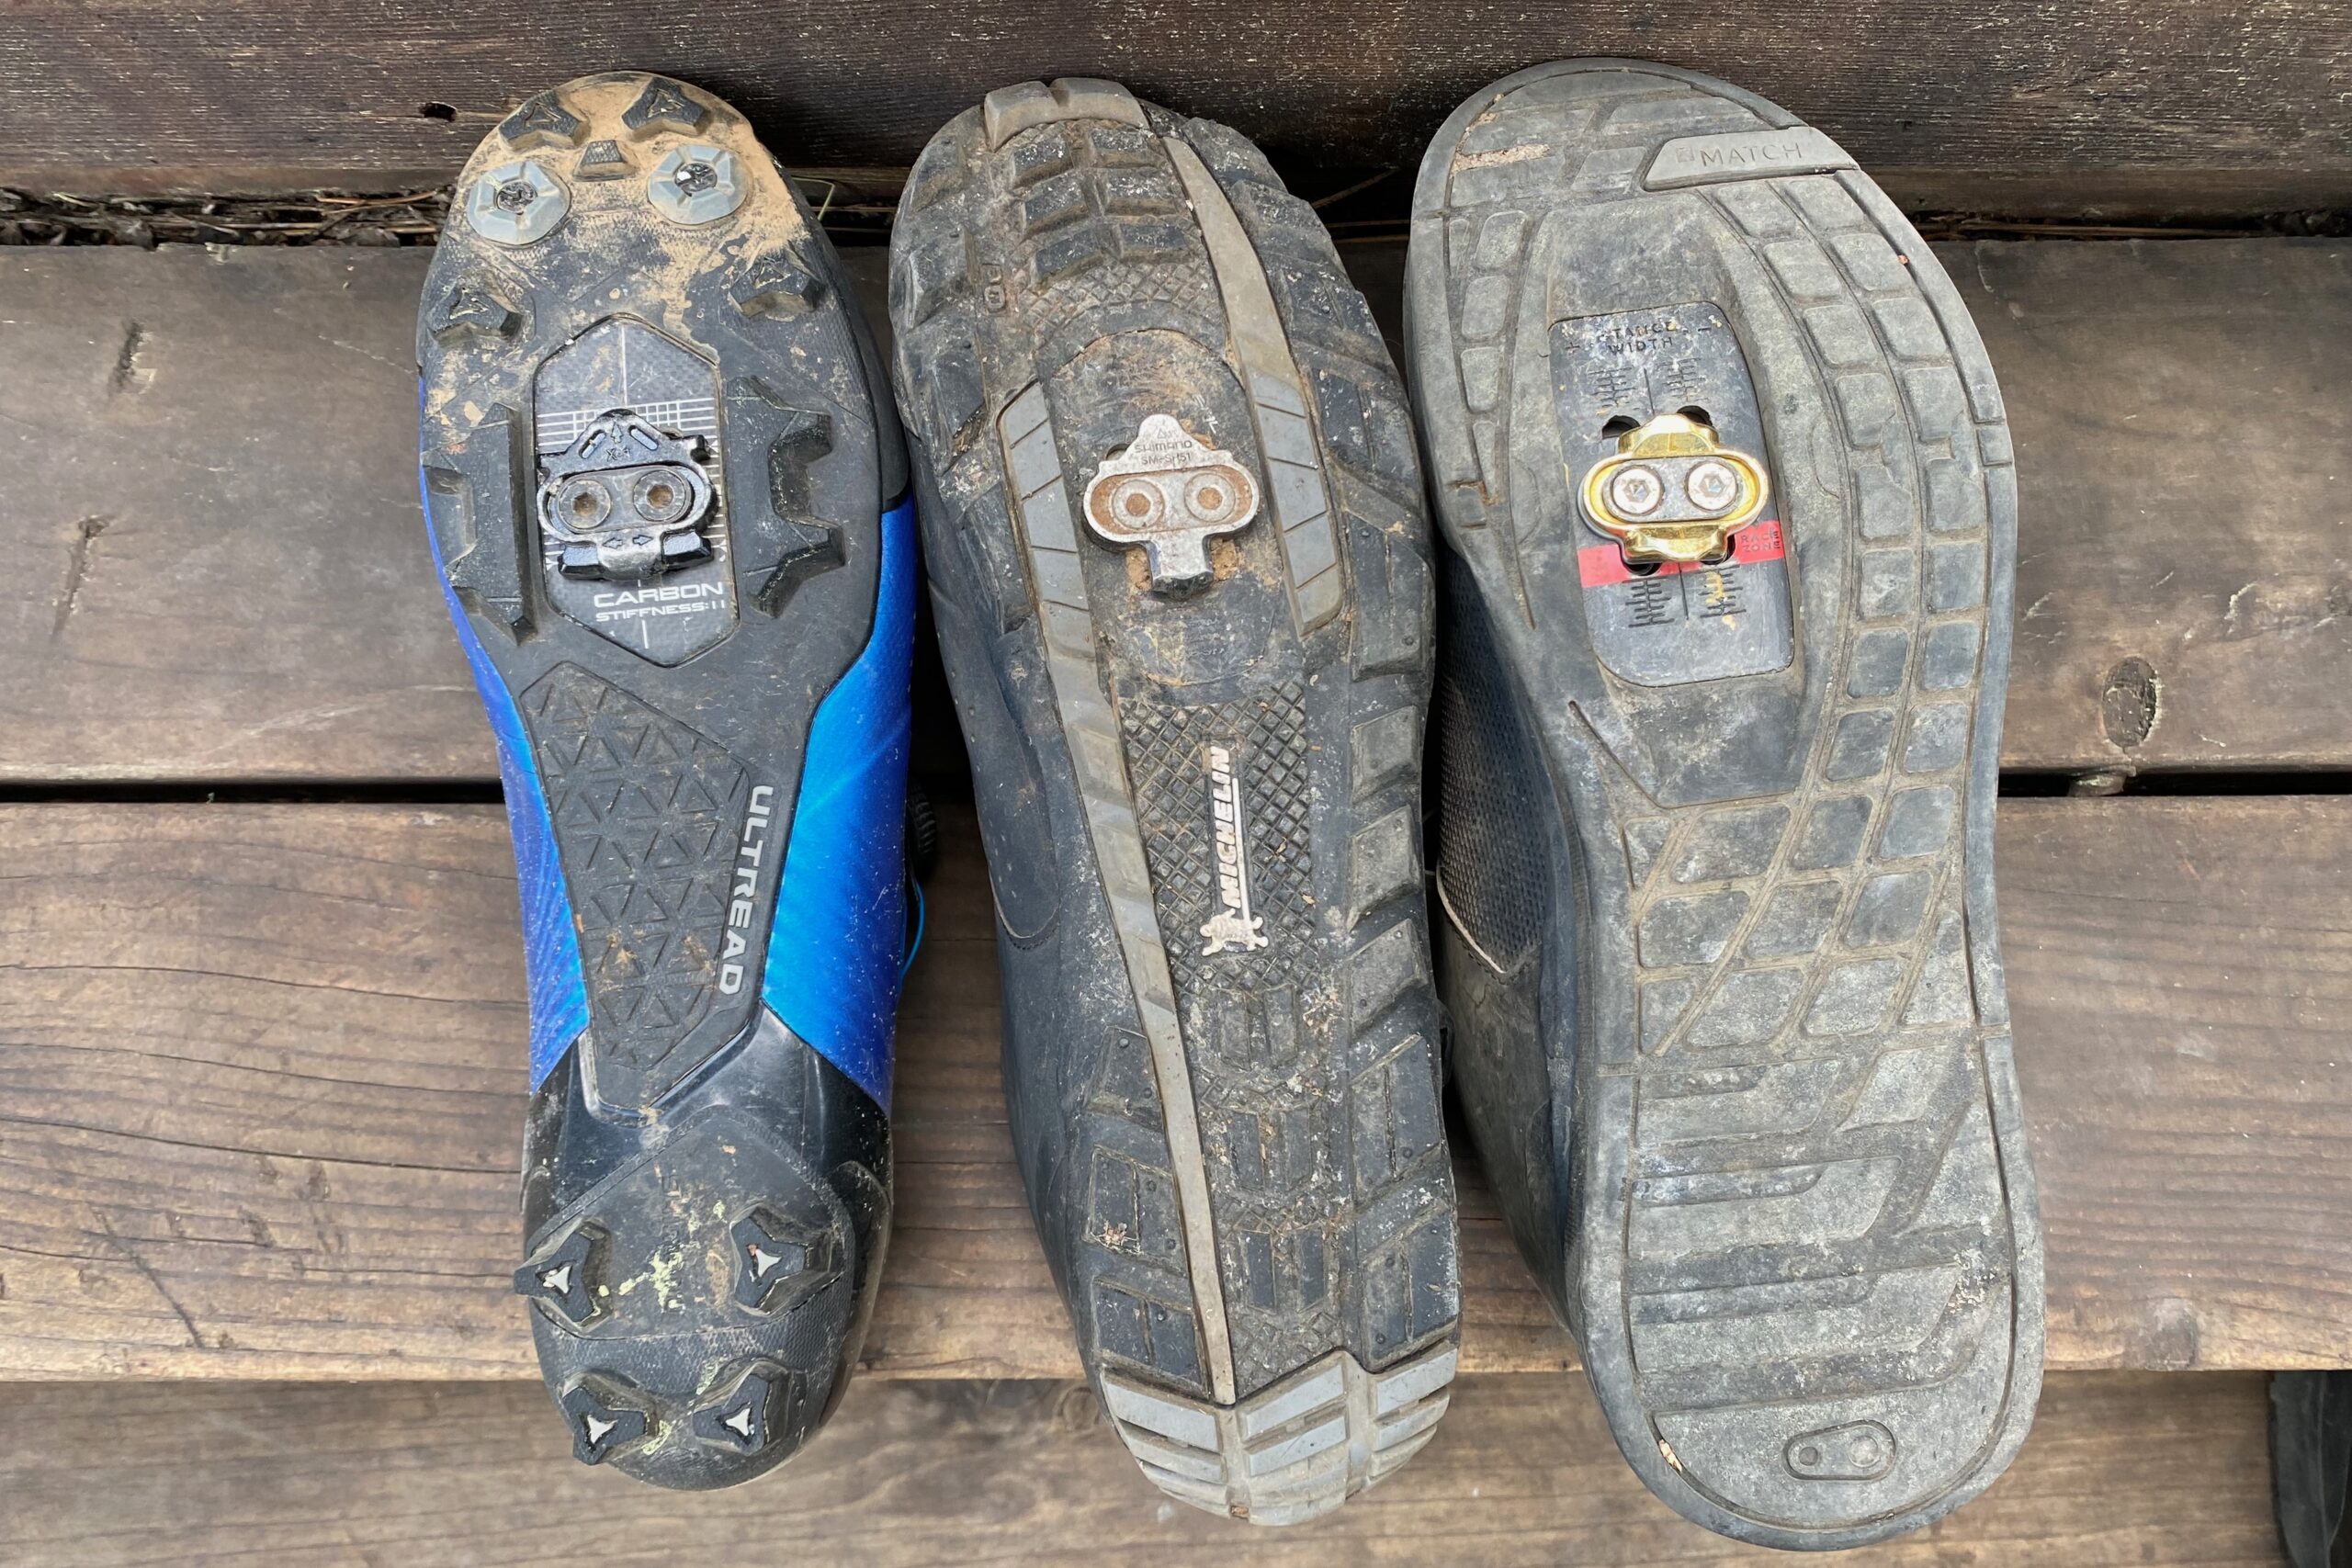 Examples of different outsole designs on mountain bike shoes